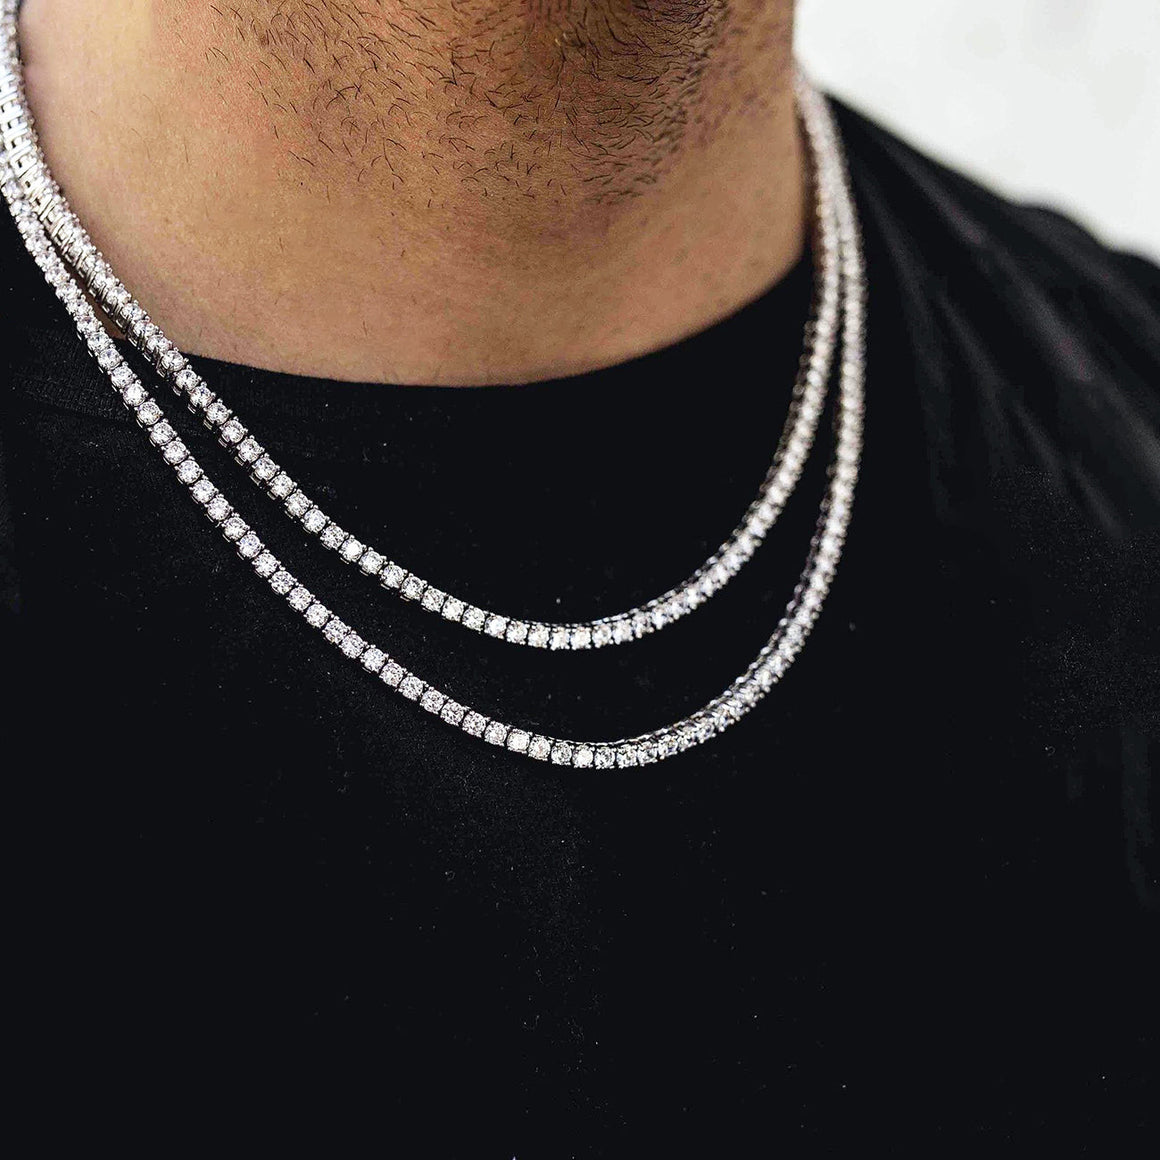 54 FLORAL 2.5mm ICED TENNIS CRYSTAL DIAMOND CURB NECKLACE CHAIN - SILVER